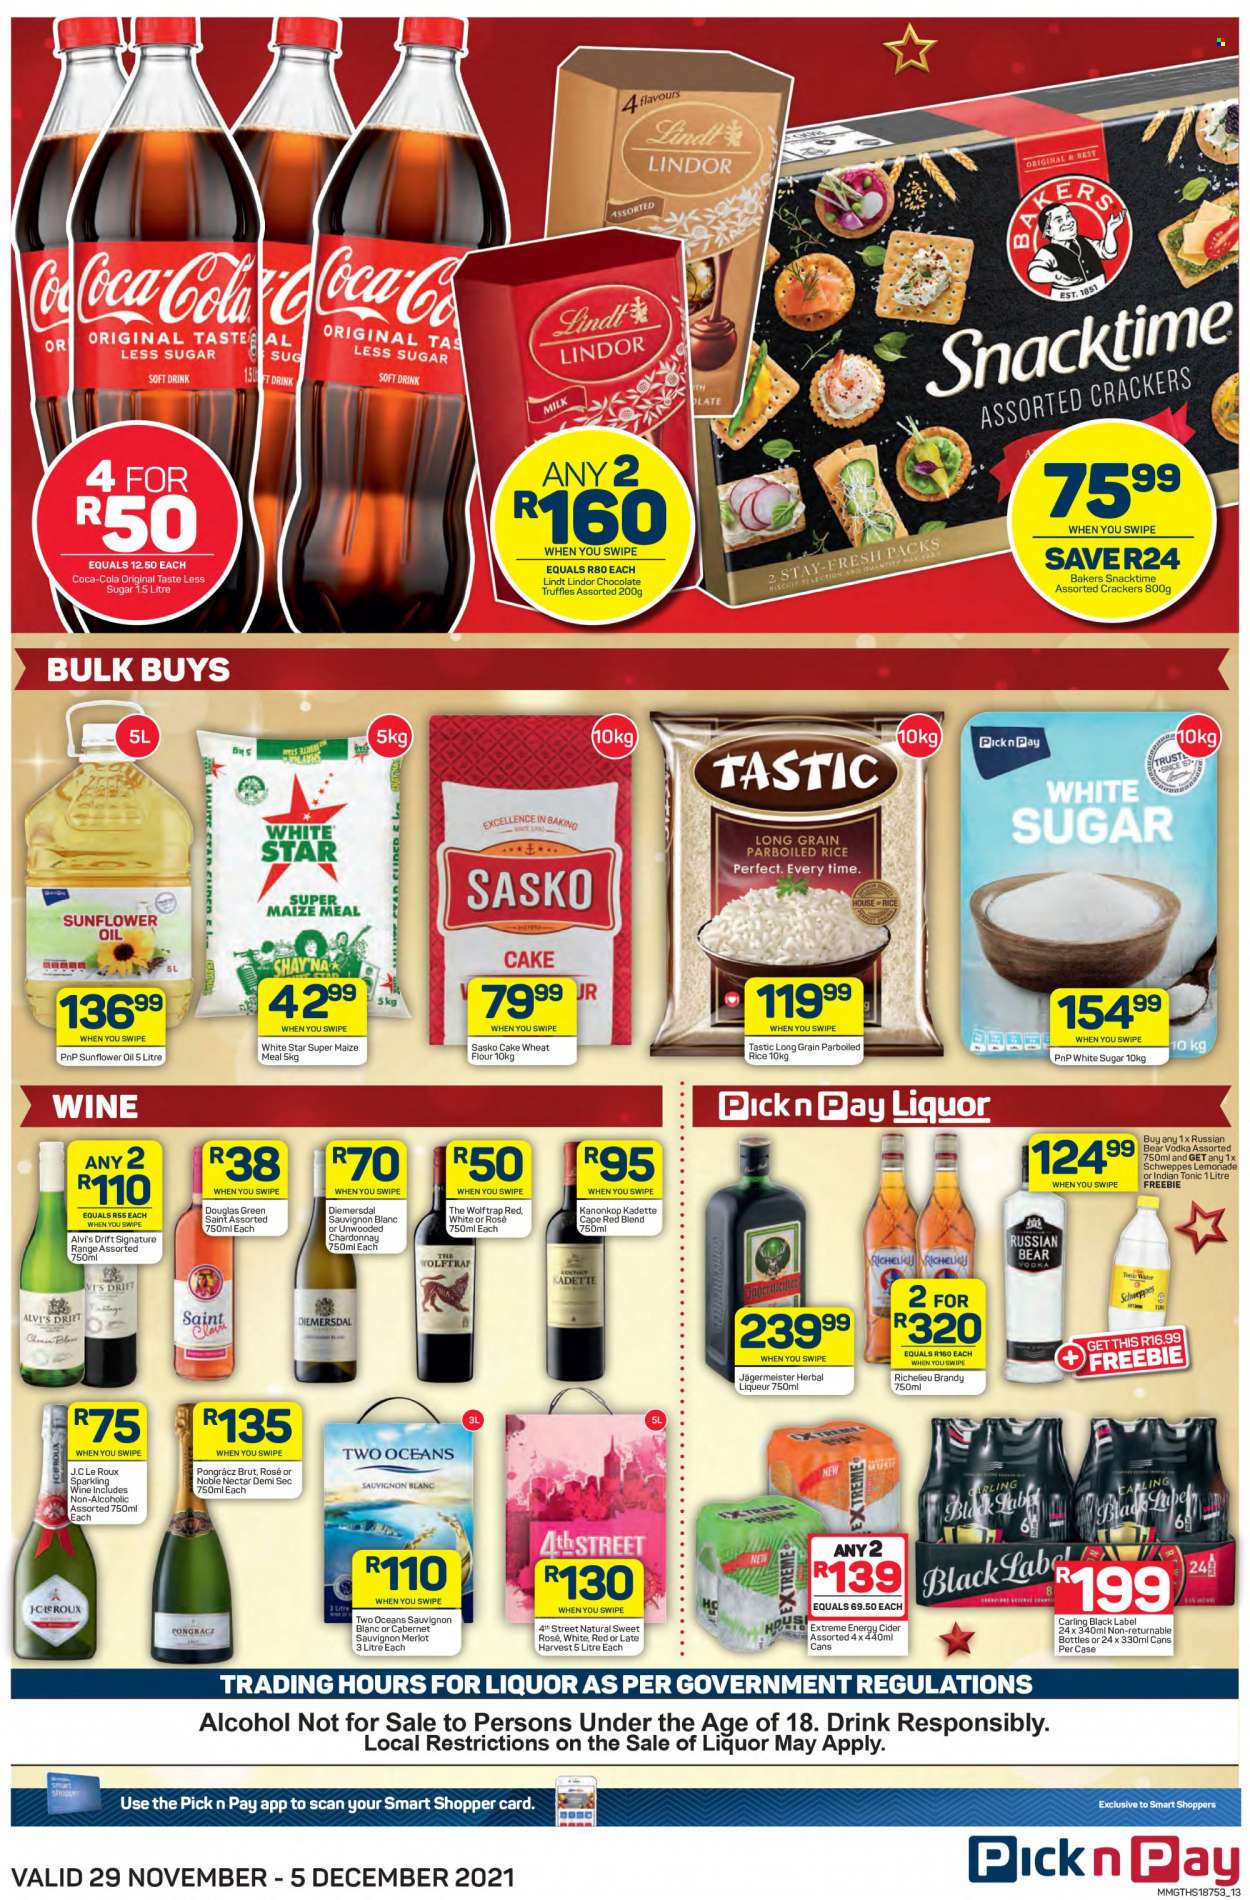 Pick n Pay specials - 11.29.2021 - 12.05.2021. 